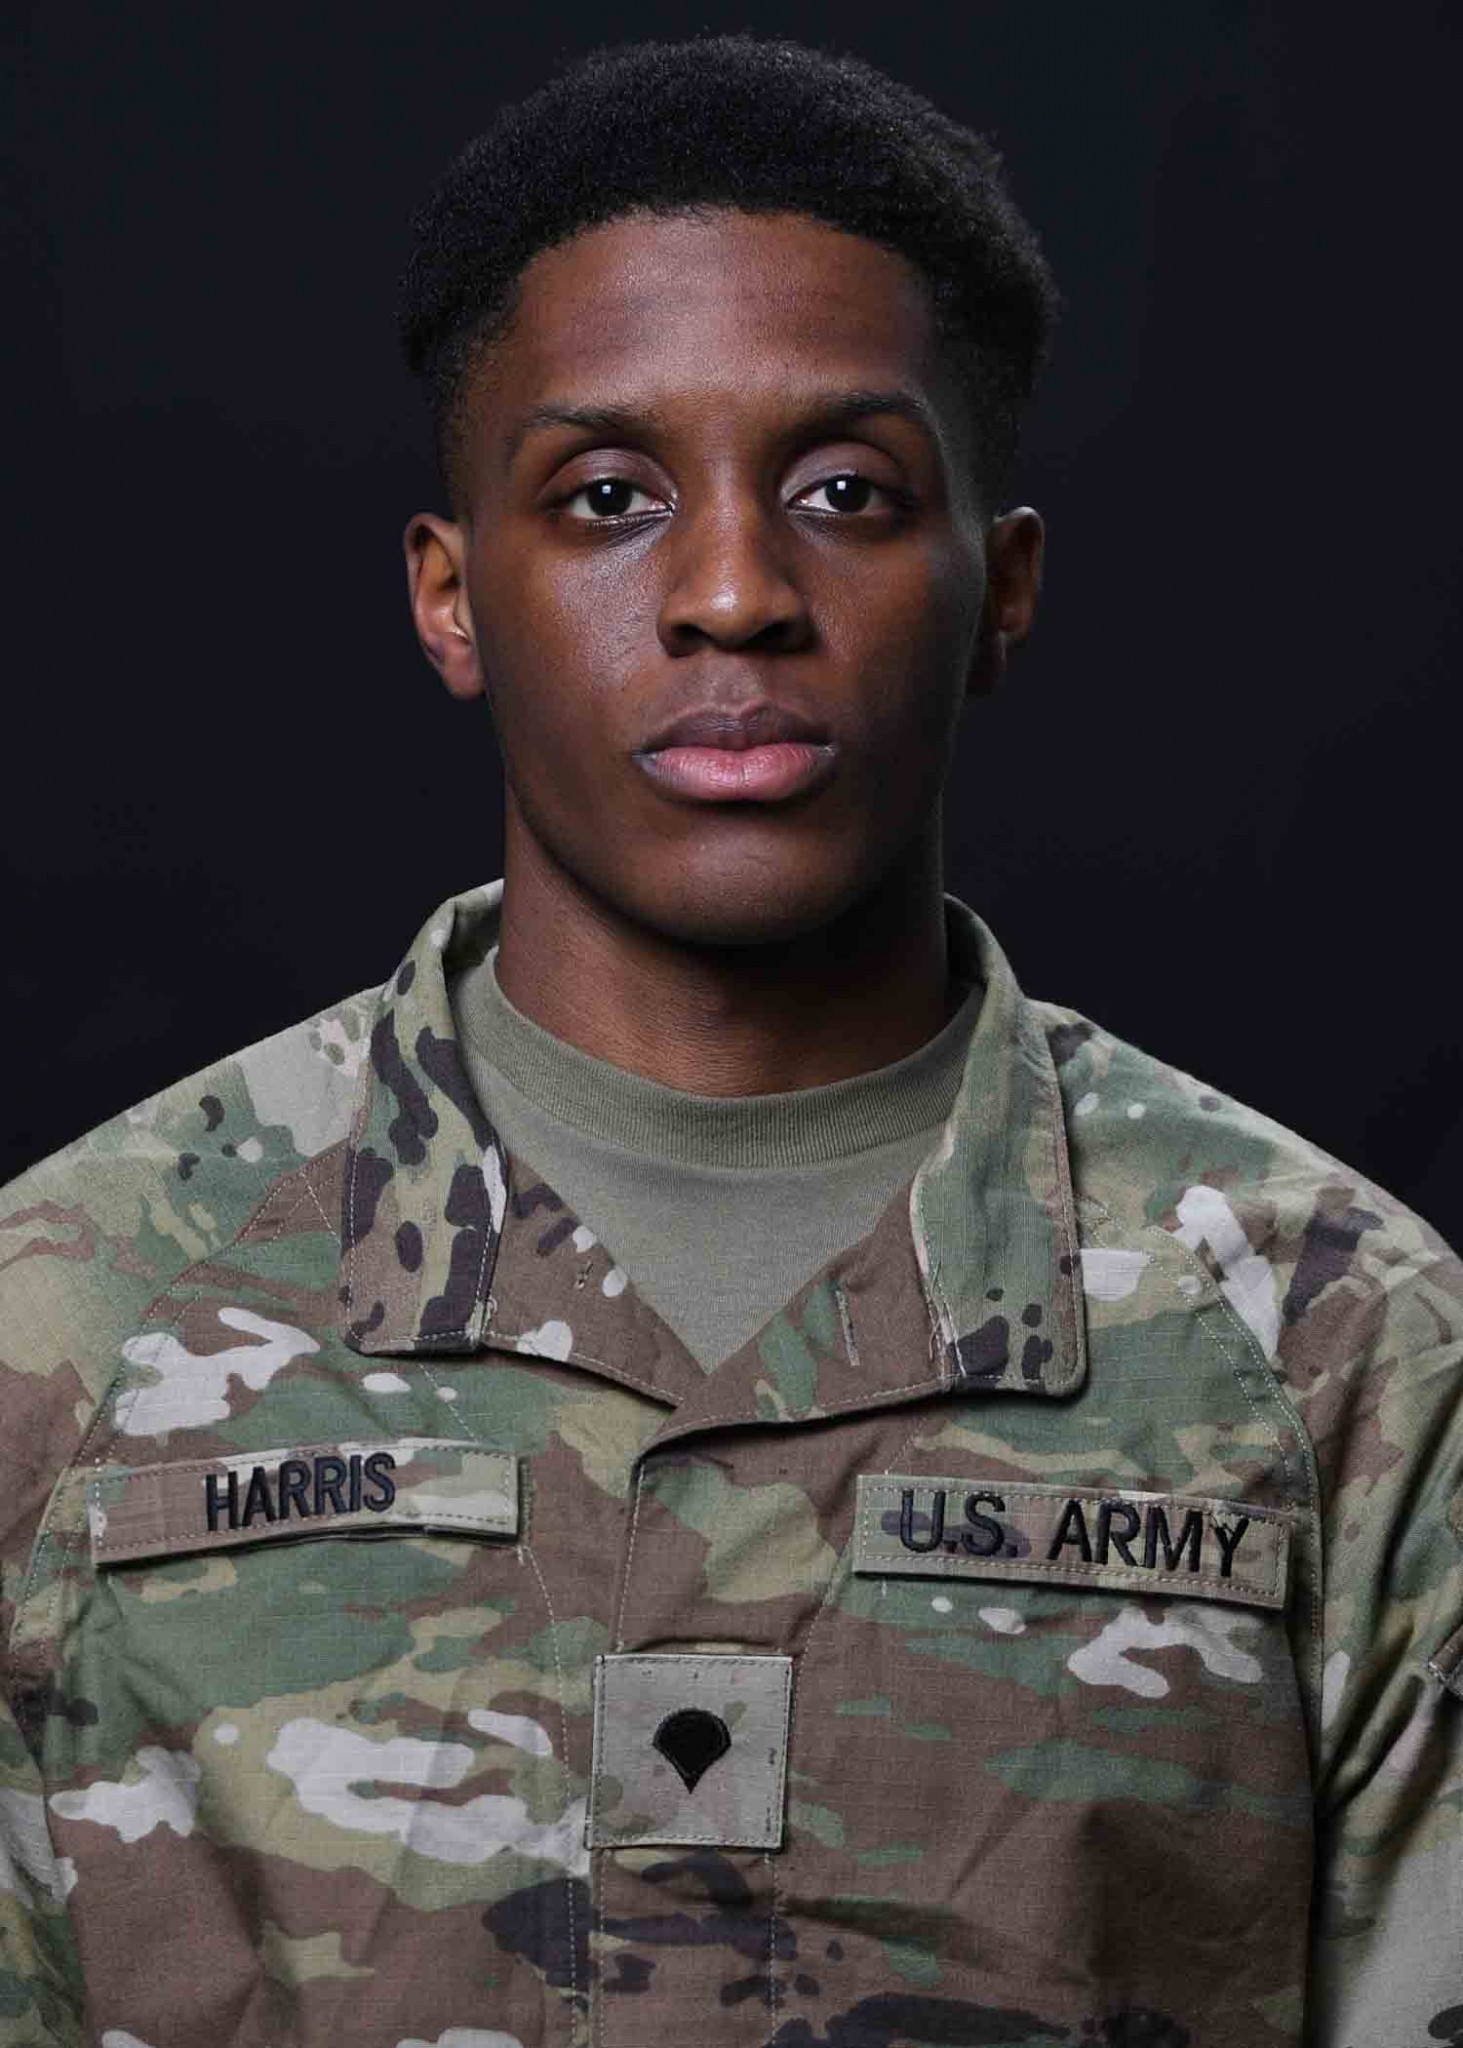 American soldier Harris seals place in United States taekwondo team